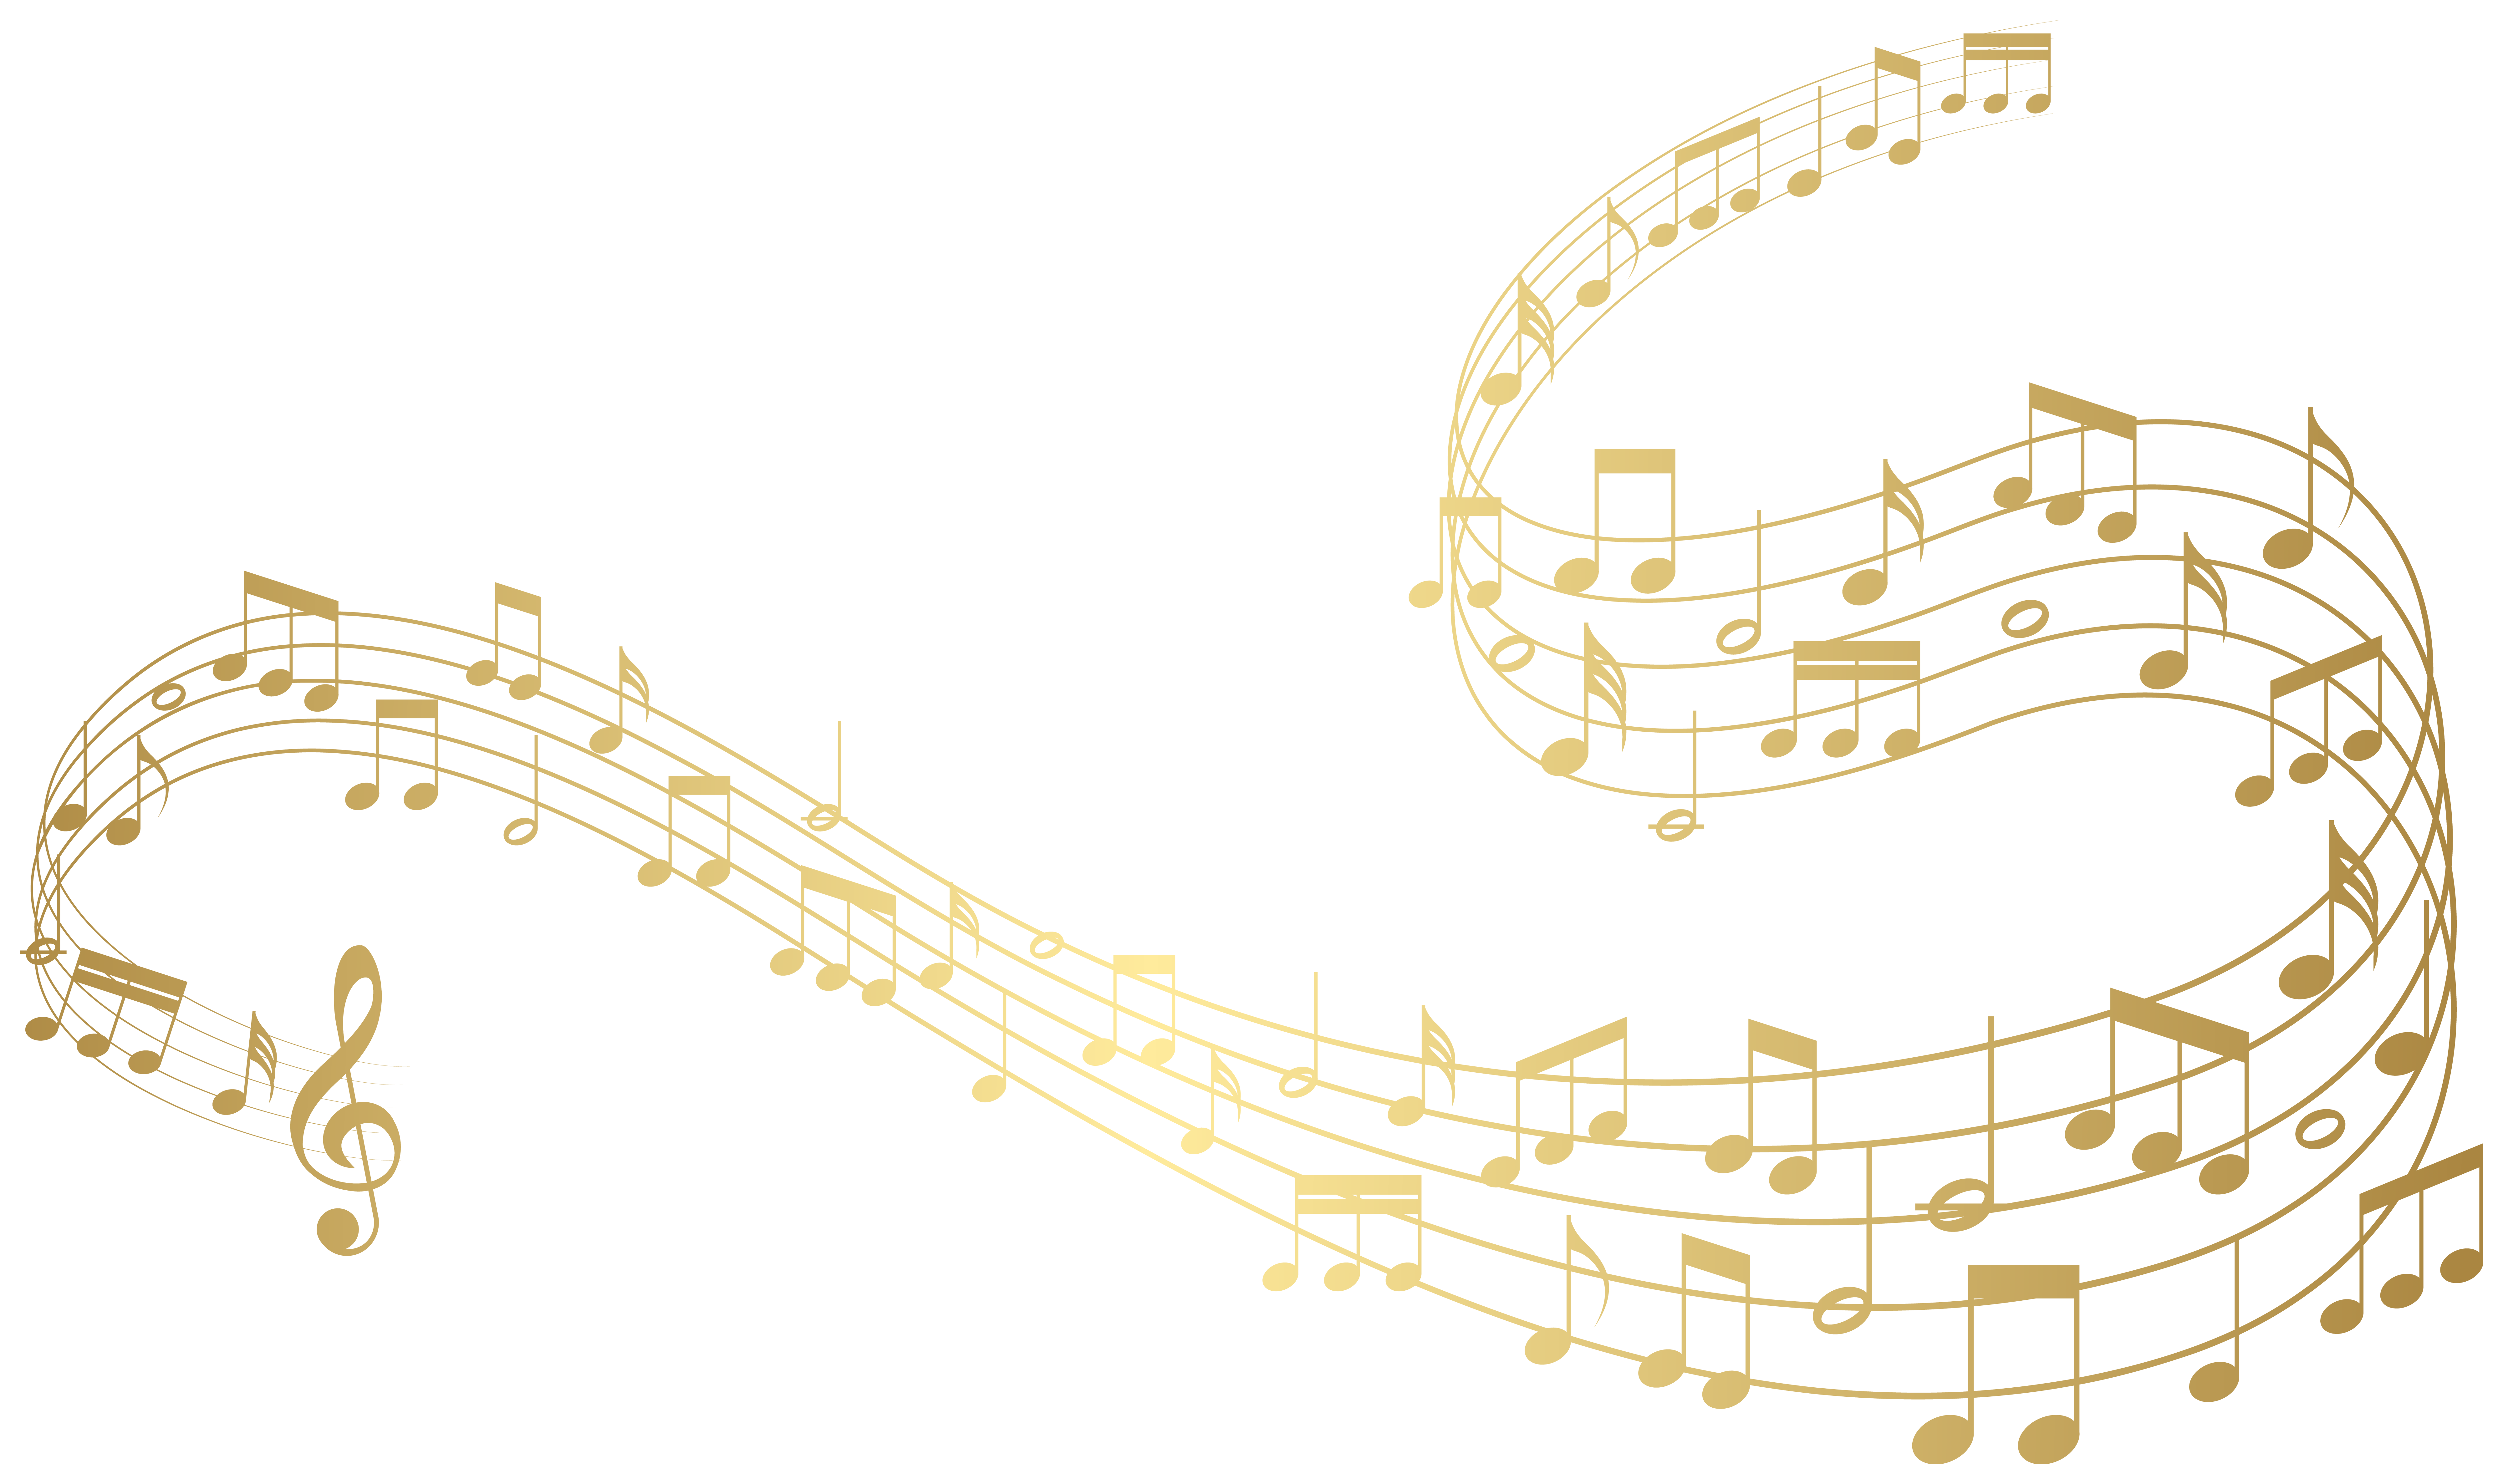 A series of music notes in a ribbon.